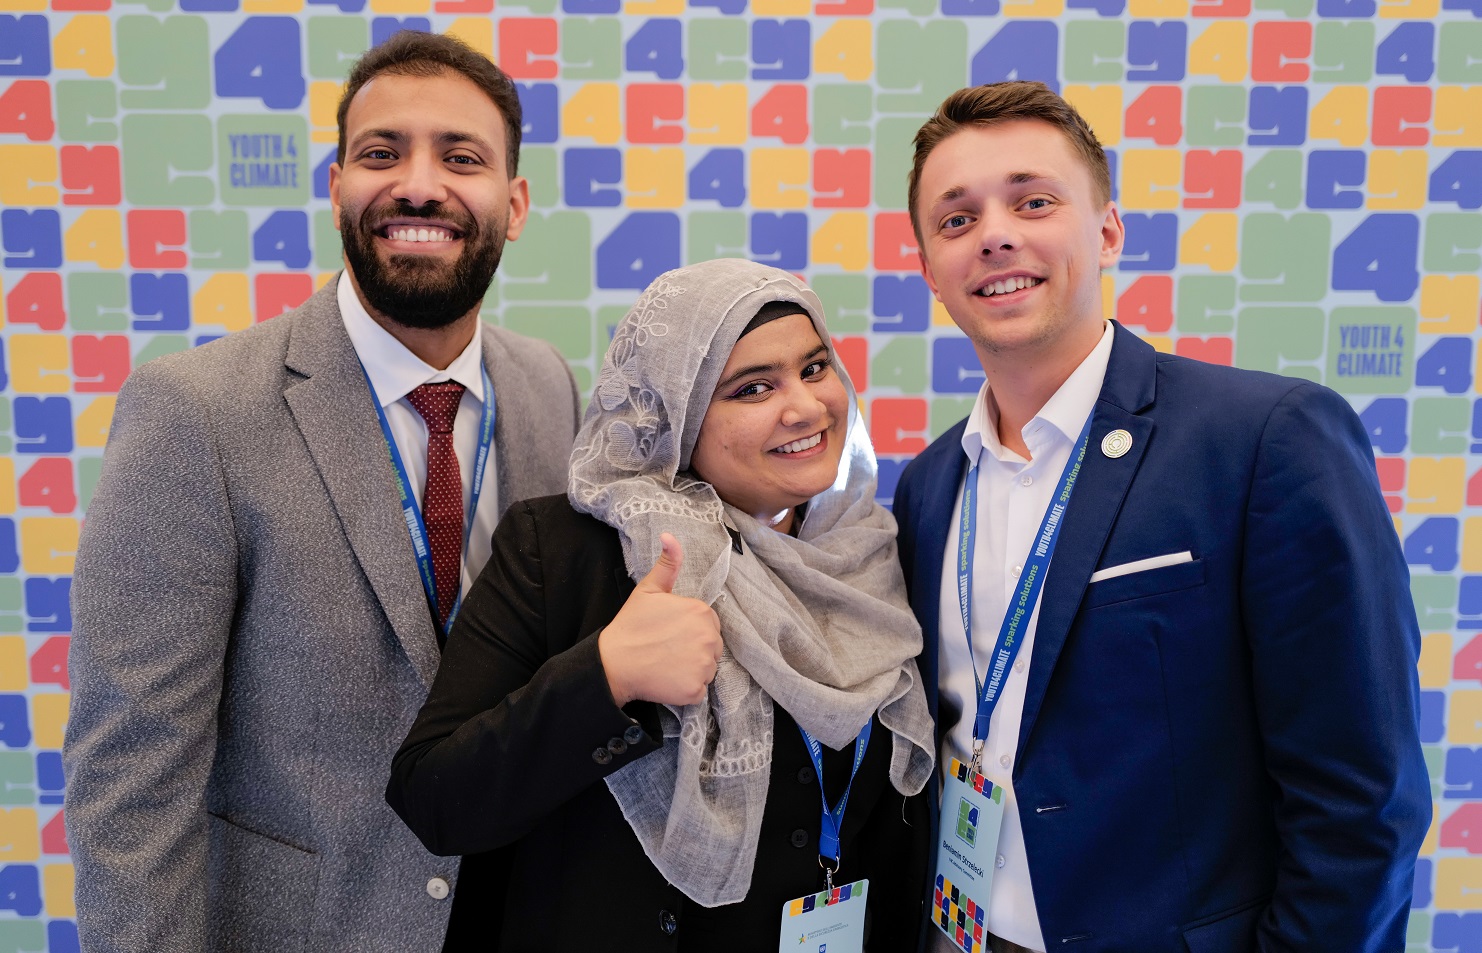 Sahar poses with other youth leaders 